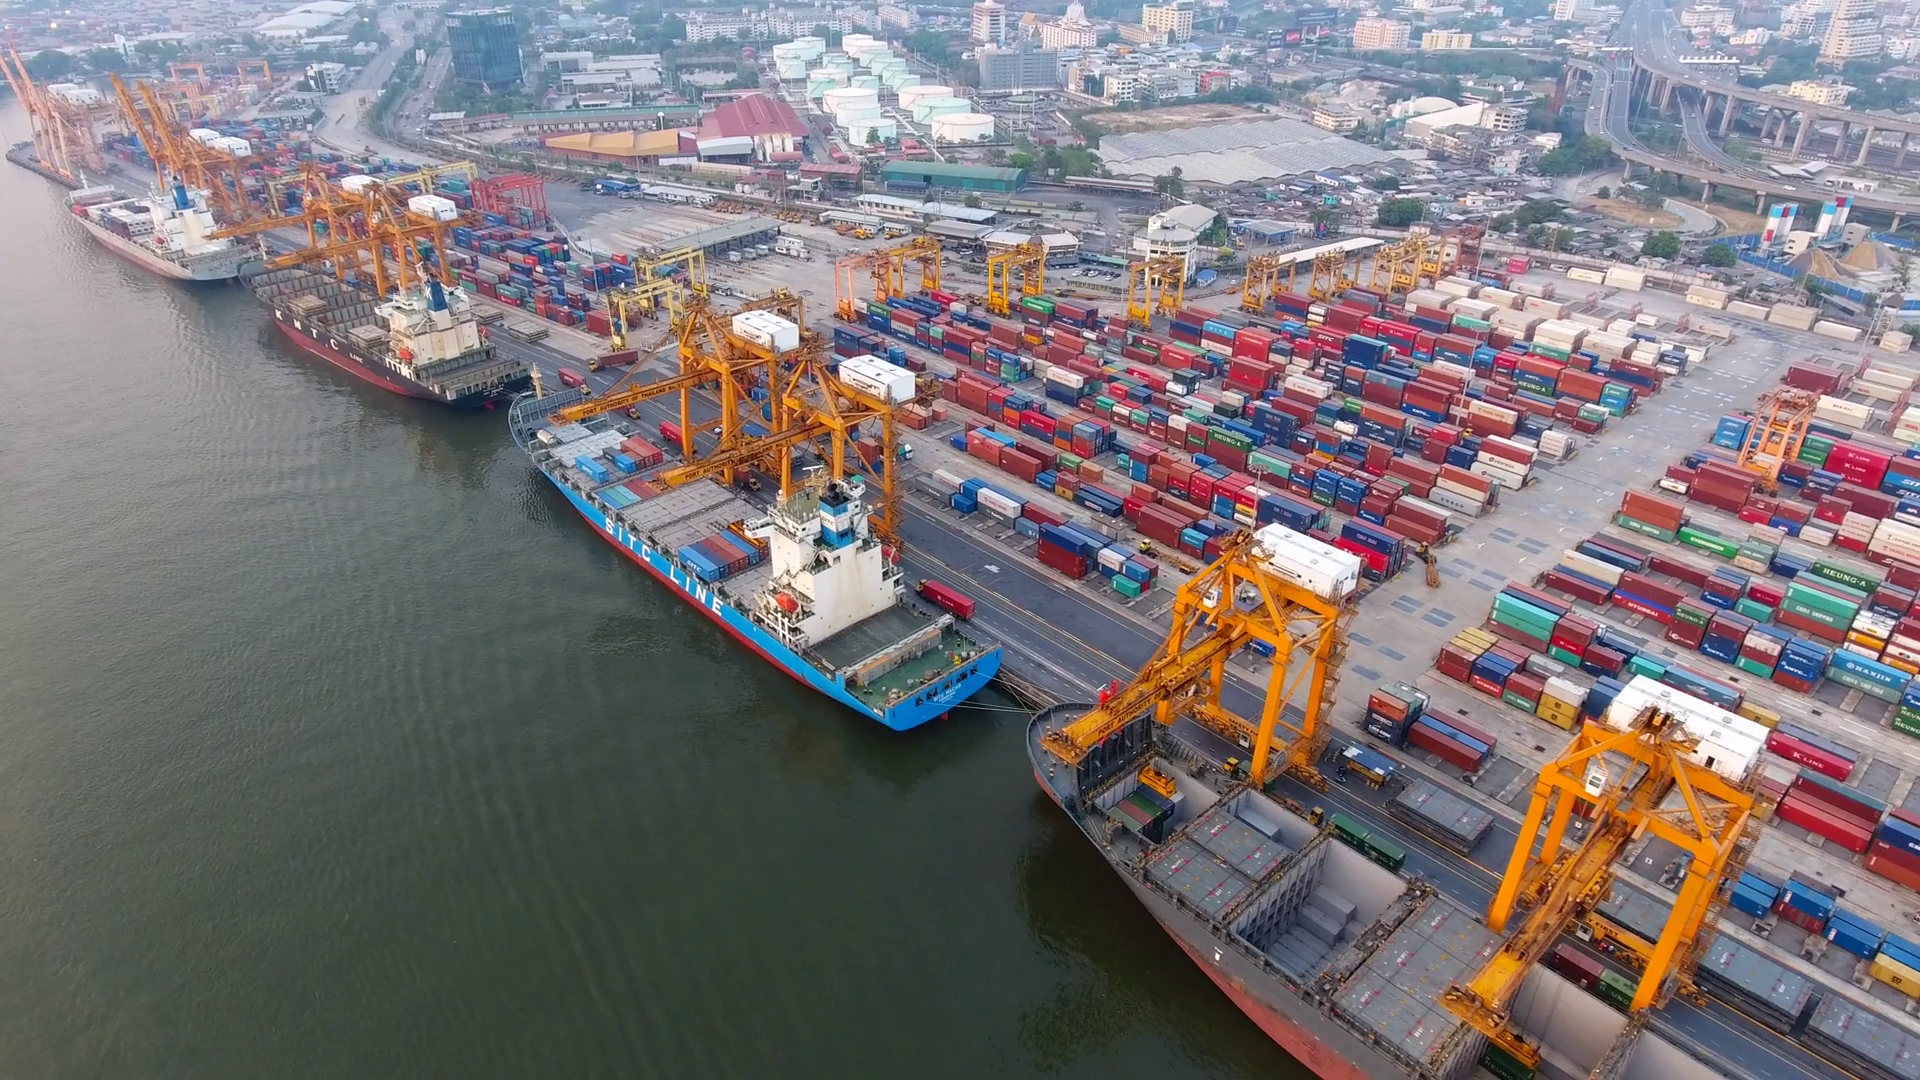 Aerial view of container ships and lifting cranes in the Port of ...